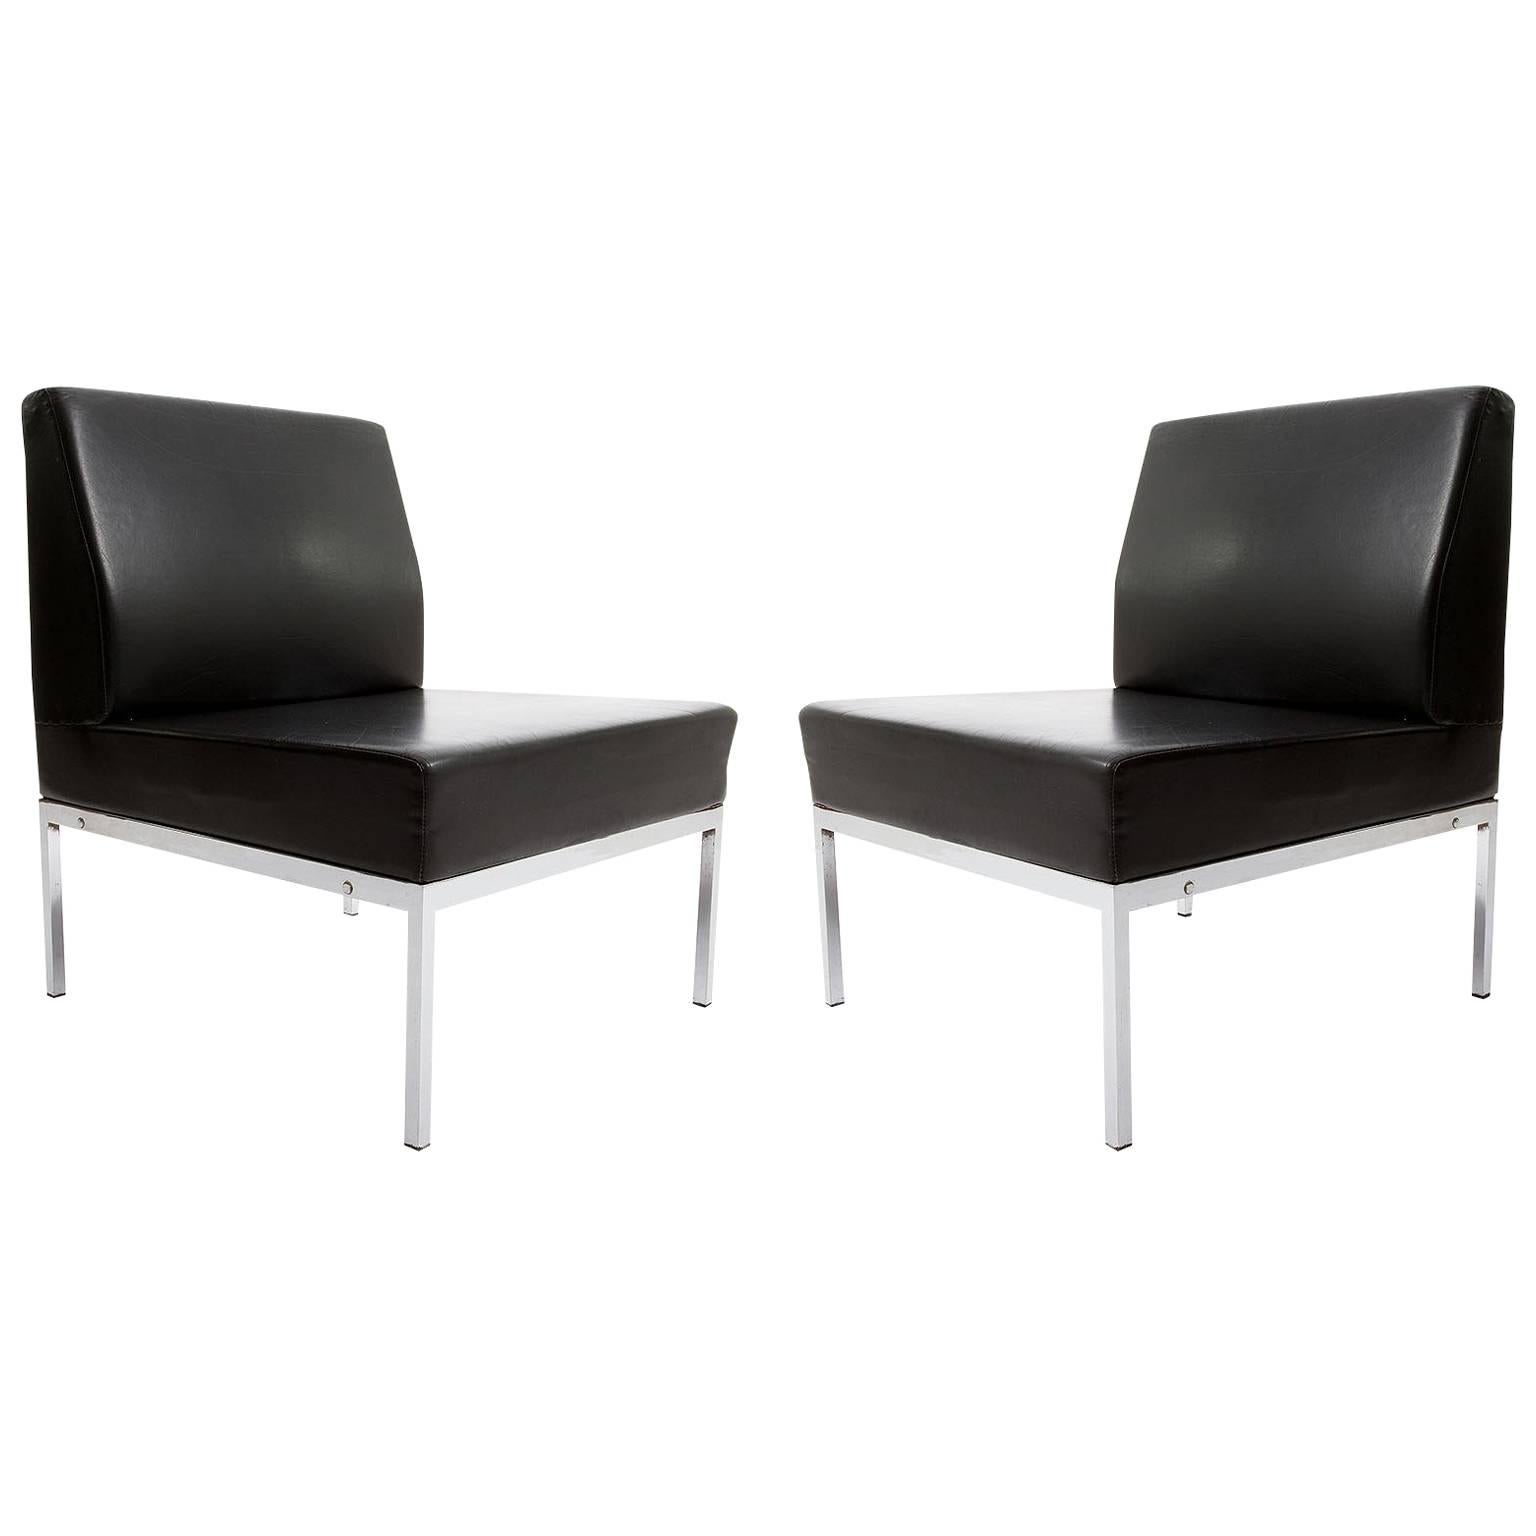 Pair of Lounge Chairs, Black Leather Chrome, Attributed to Thonet, 1970 For Sale